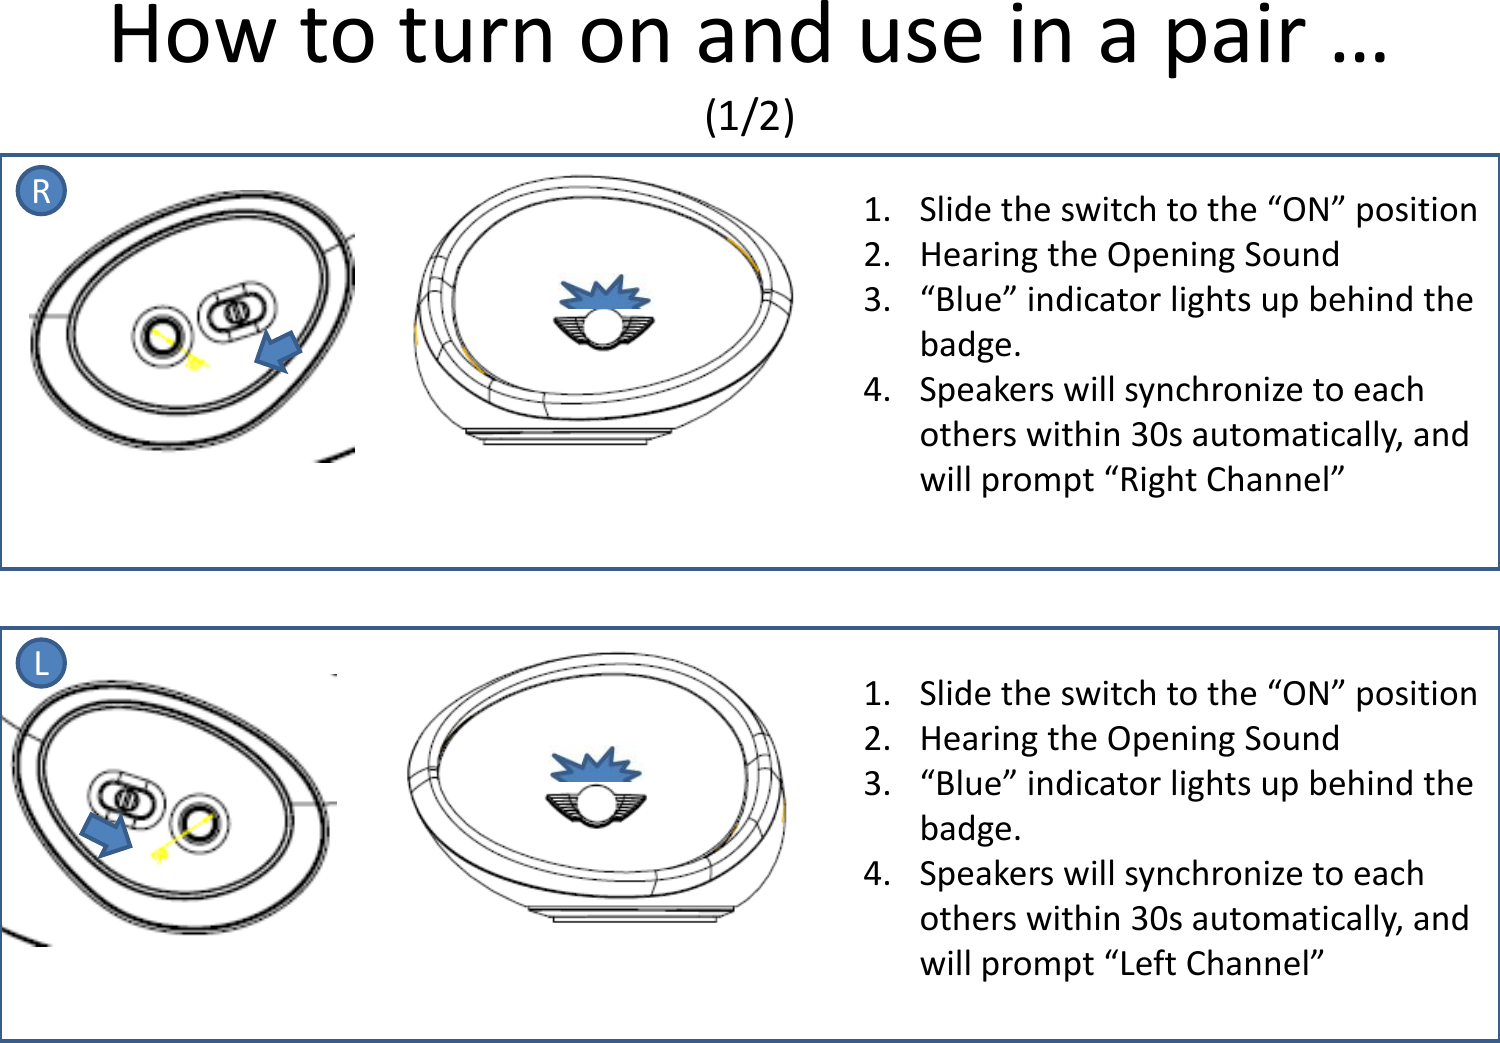 How to turn on and use in a pair … (1/2) R L 1. Slide the switch to the “ON” position 2. Hearing the Opening Sound 3. “Blue” indicator lights up behind the badge. 4. Speakers will synchronize to each others within 30s automatically, and will prompt “Right Channel”  1. Slide the switch to the “ON” position 2. Hearing the Opening Sound 3. “Blue” indicator lights up behind the badge. 4. Speakers will synchronize to each others within 30s automatically, and will prompt “Left Channel” 